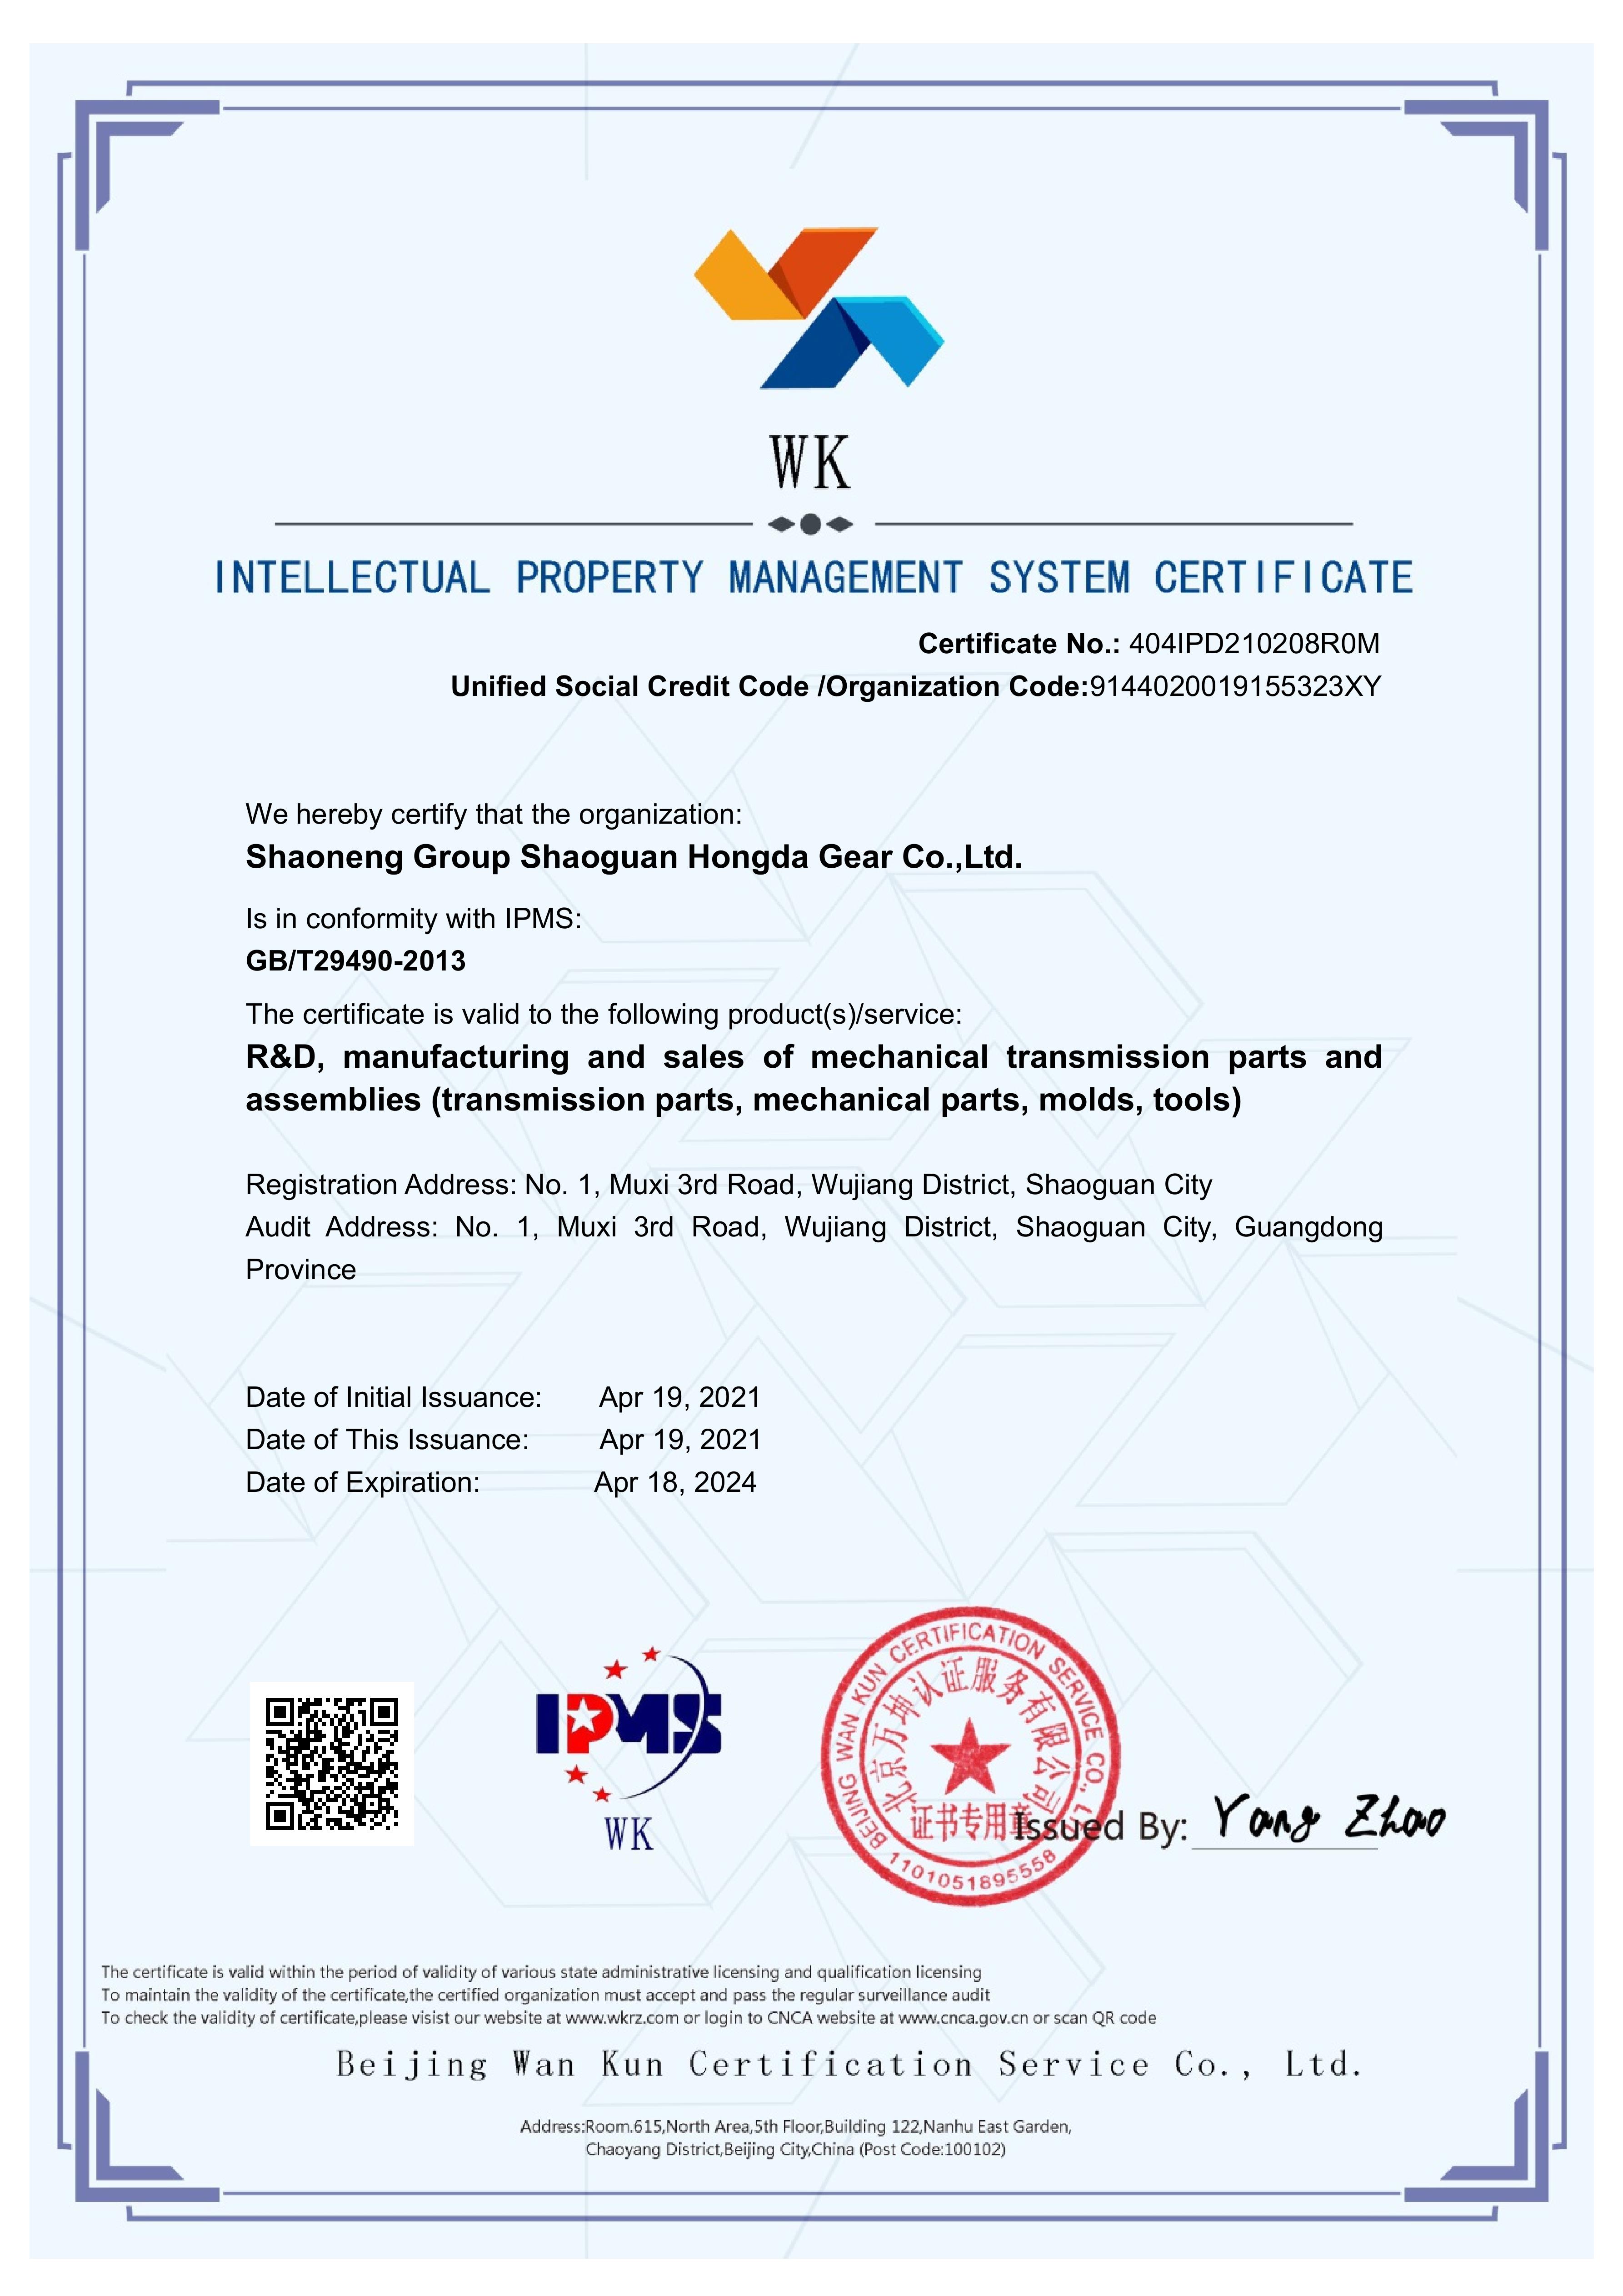 INTELLECTUAL PROPERTY MANAGEMENT SYSTEM CERTIFICATE Certificate